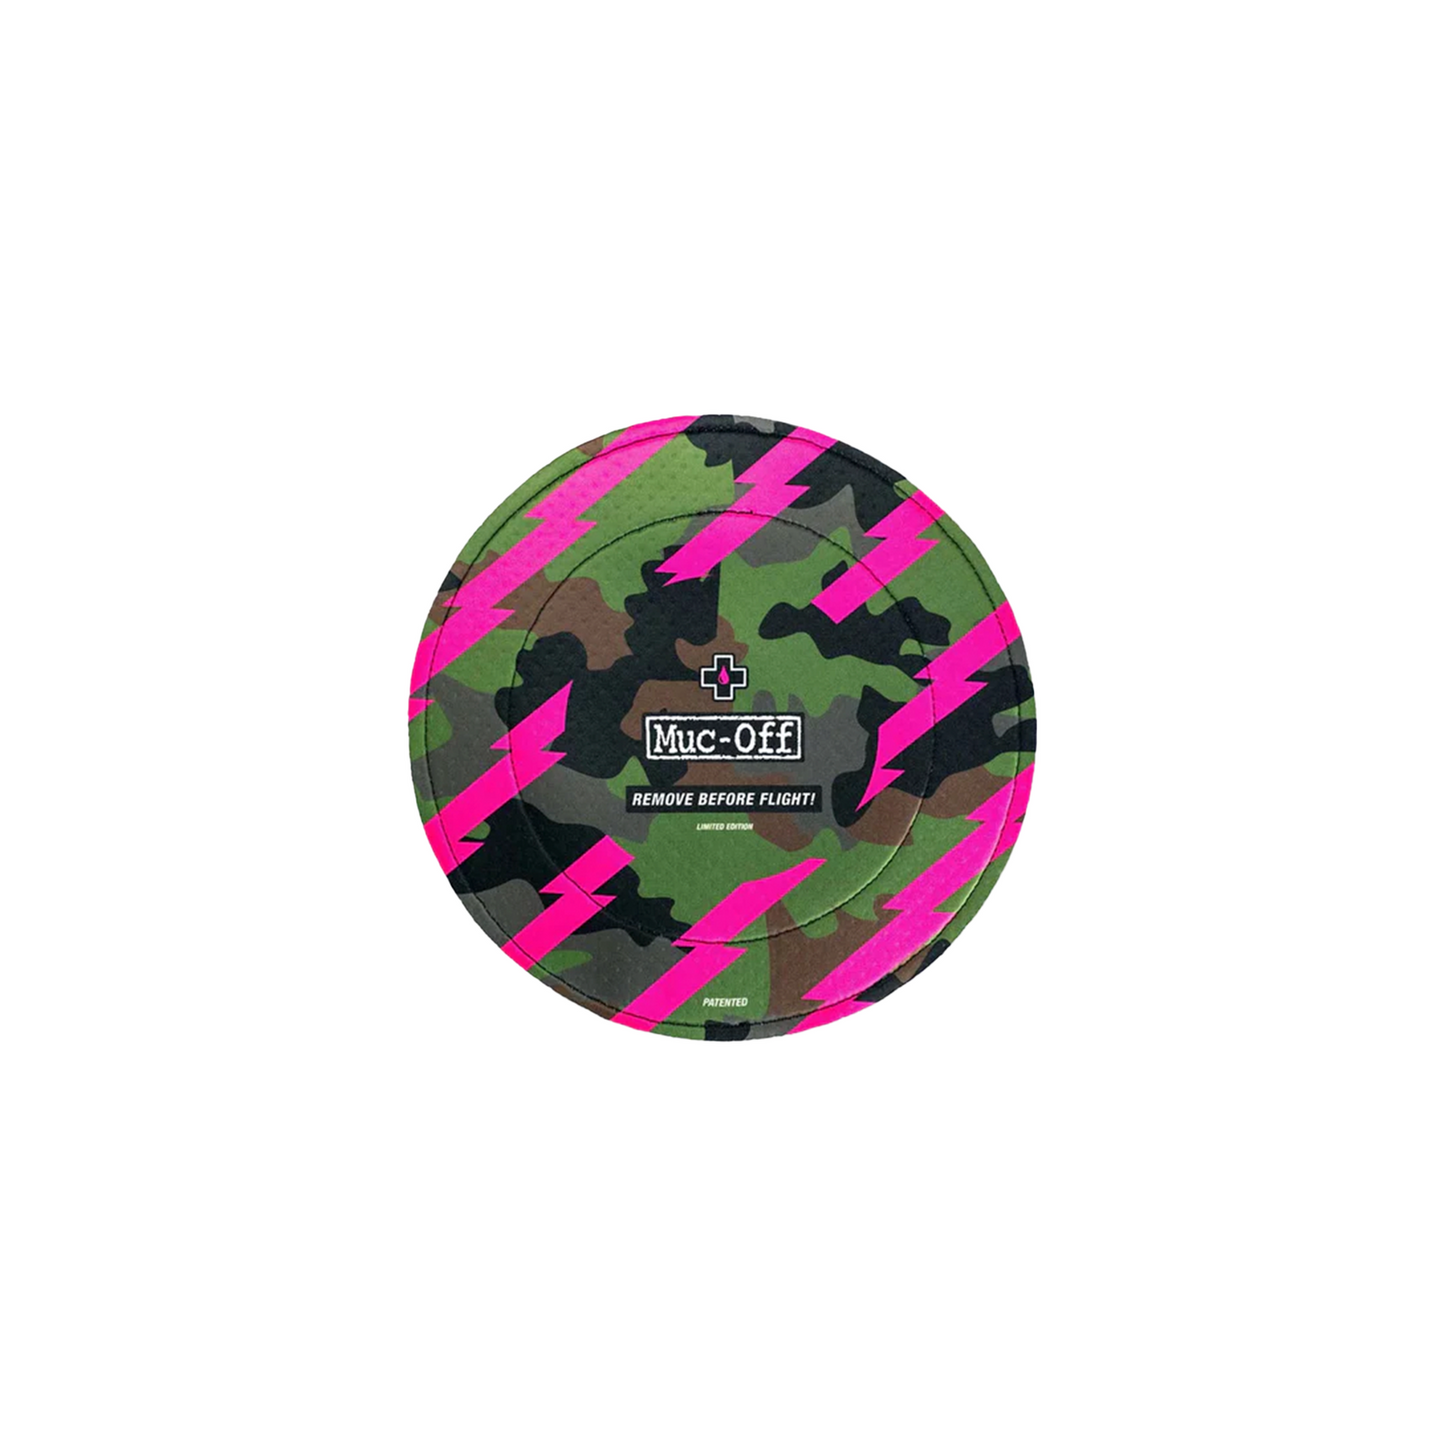 Muc-Off Camo Disc Brake Covers (Pair) | Complete Cyclist - Finally, the solution to protecting your disc brakes during maintenance or transit is here! Our Patented design makes life easy, they are fast and easy to use and help to ensure you won’t have protectant or lube overspray on your discs. 